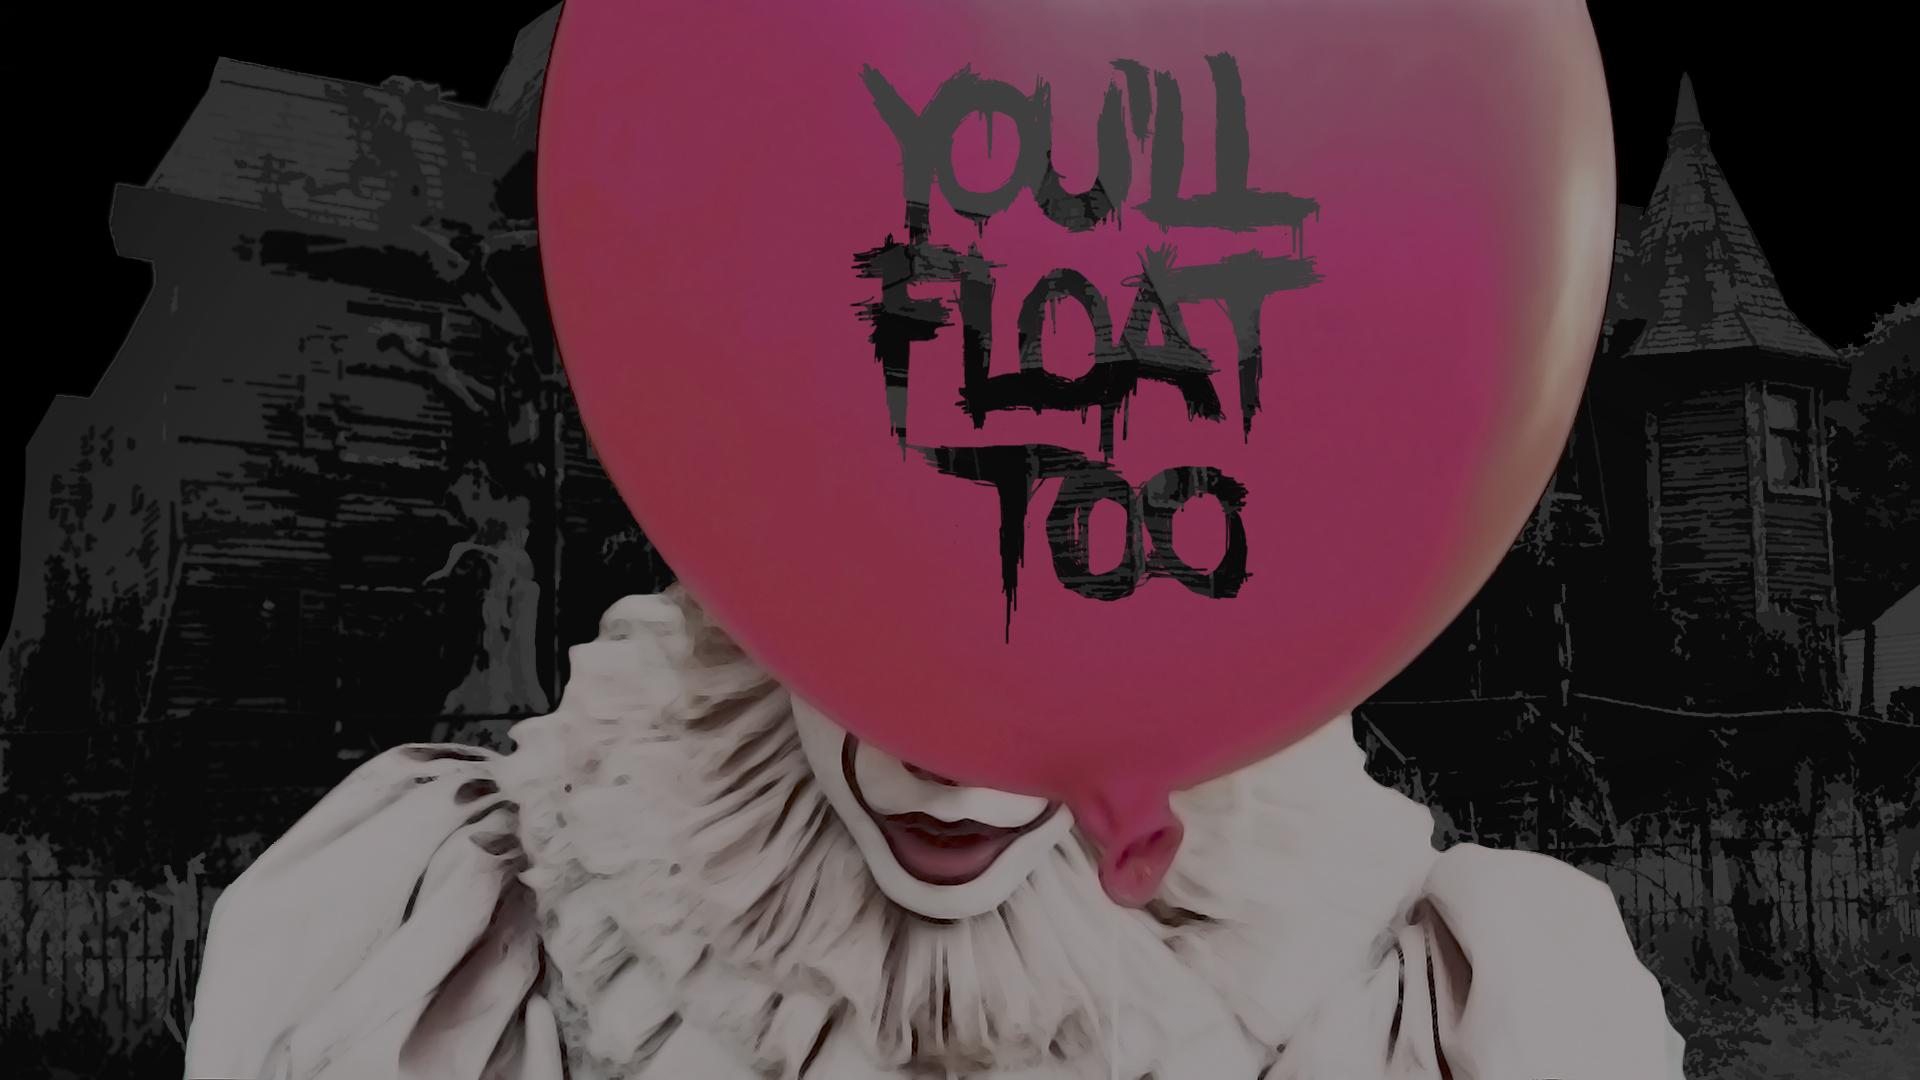 clowns, Pennywise, It movie, You will float too Wallpaper